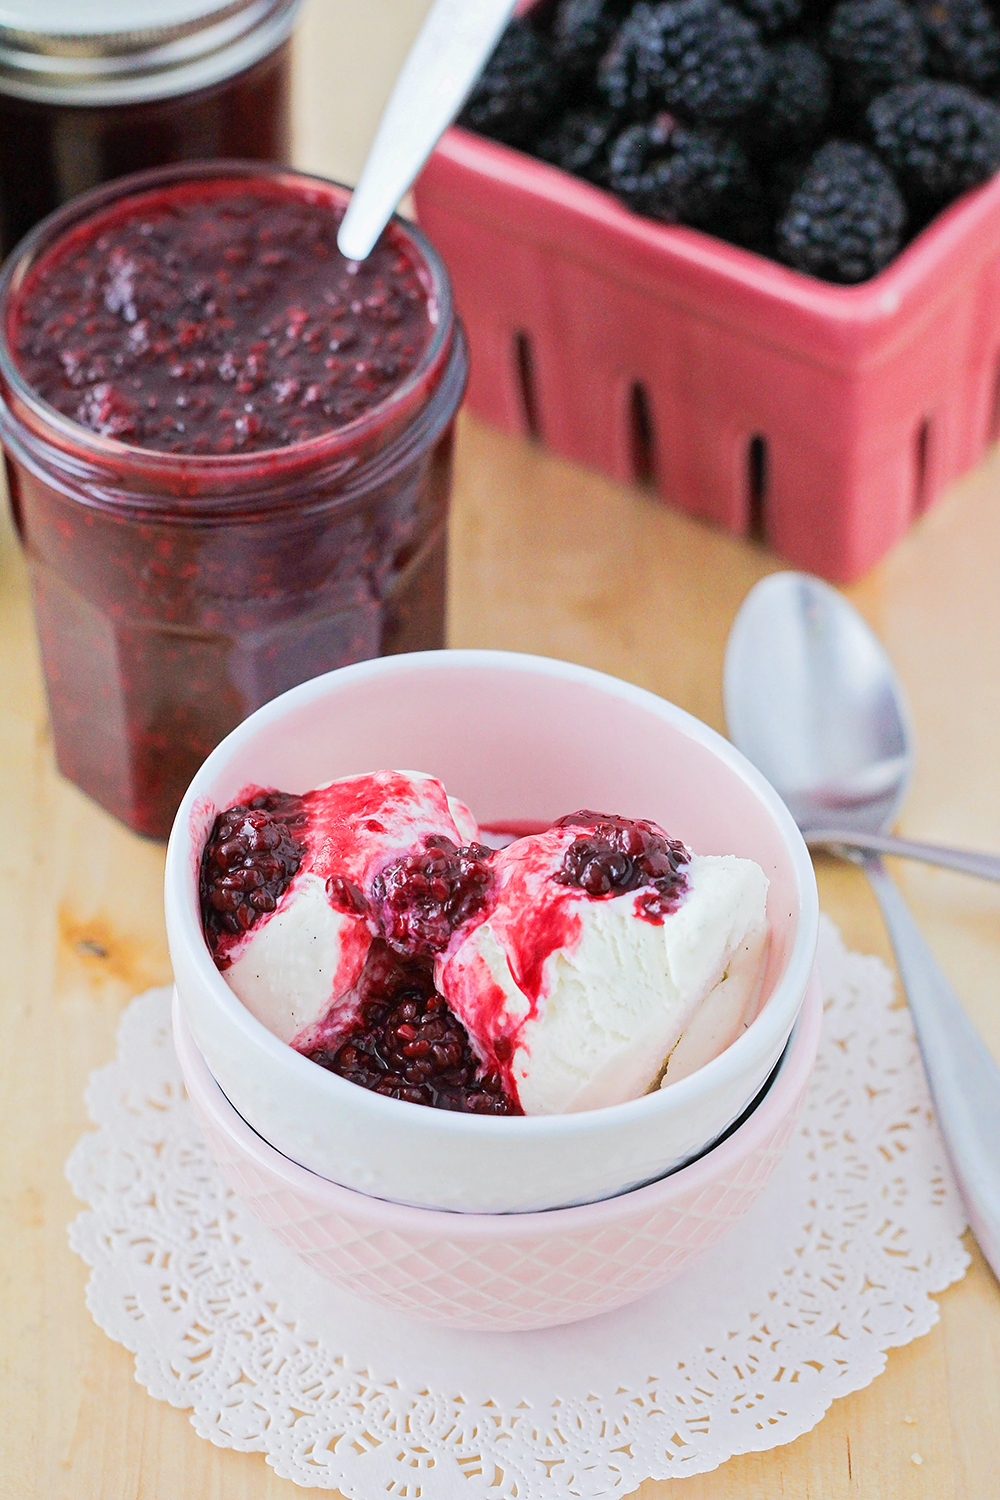 This homemade fresh blackberry sauce is the perfect topping for pancakes, waffles, ice cream, or shortcake. It's quick and easy to make, and so delicious! 